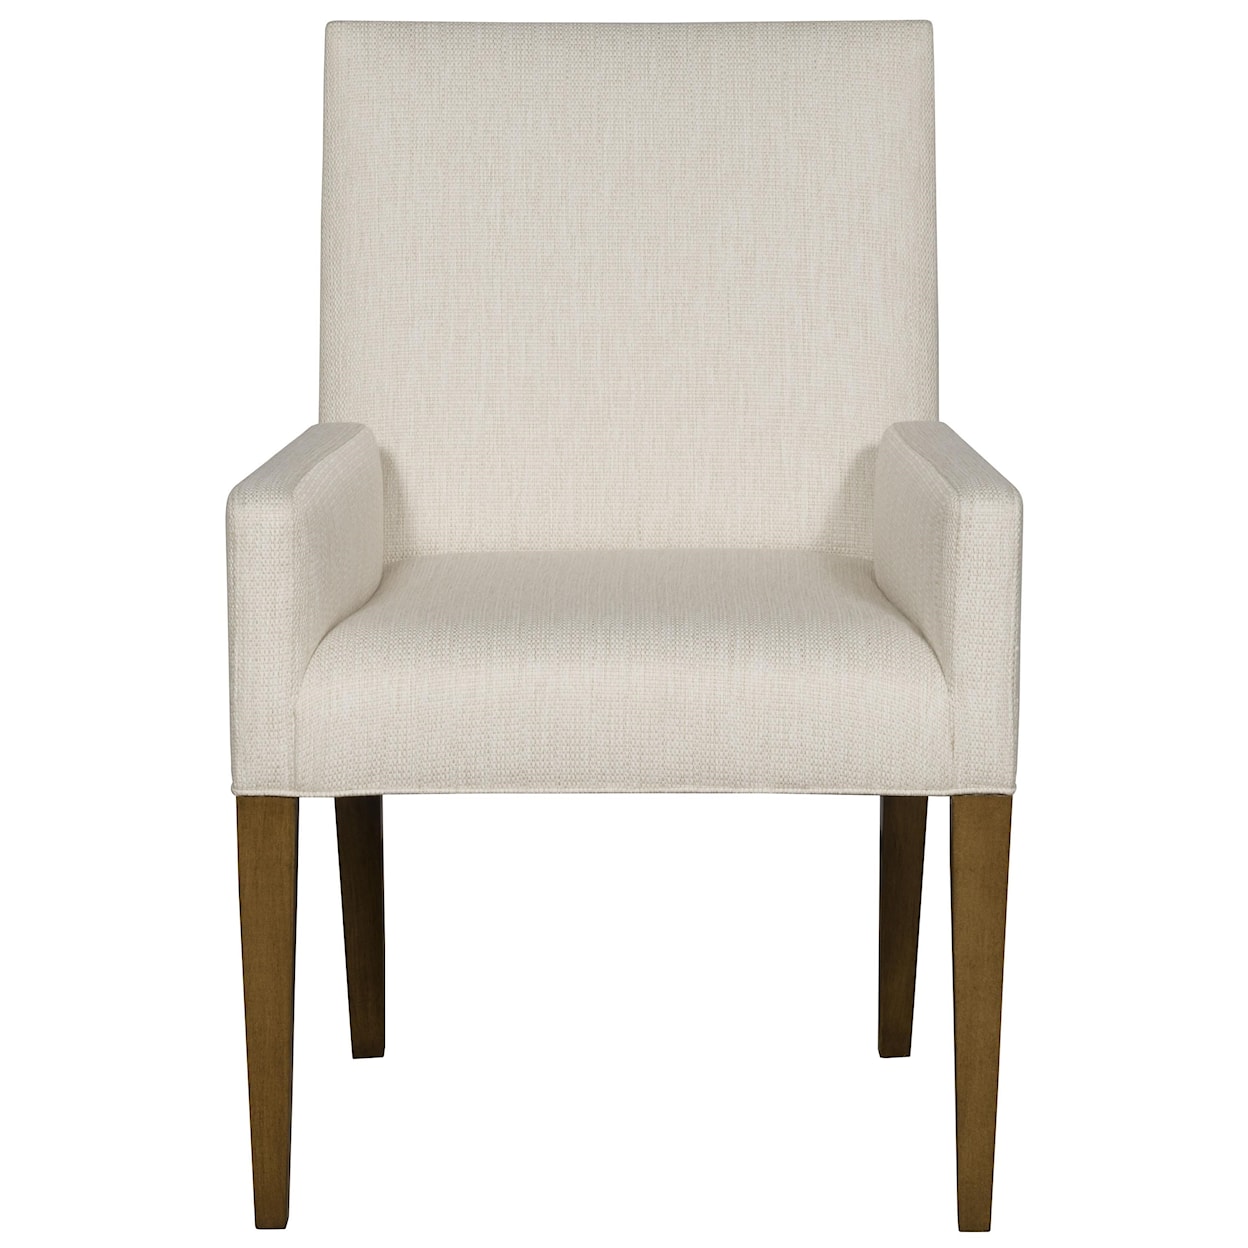 Vanguard Furniture Dune Dining Upholstered Arm Chair